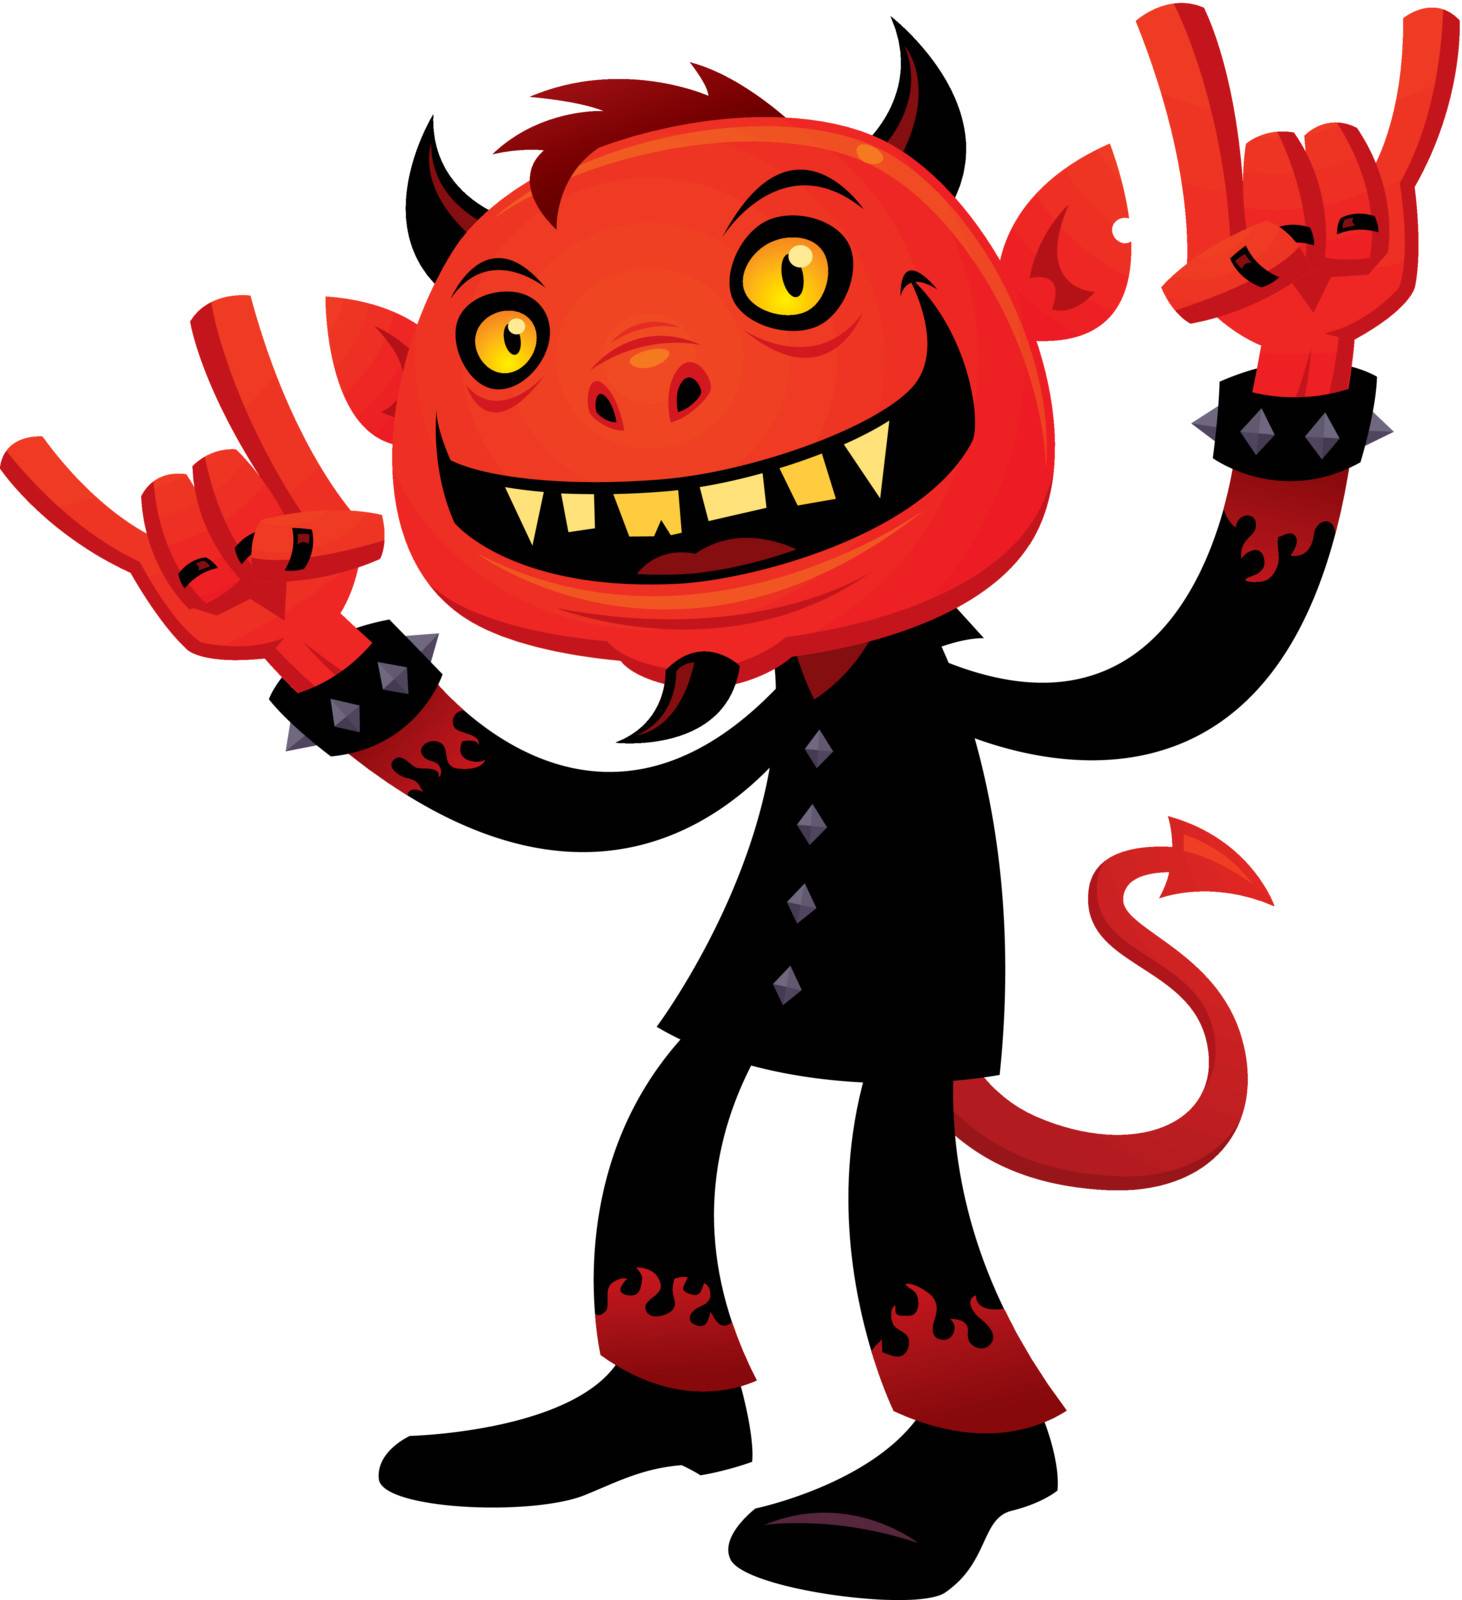 Vector cartoon illustration of a grinning devil character with heavy metal, rock and roll, devil horns hand signs.